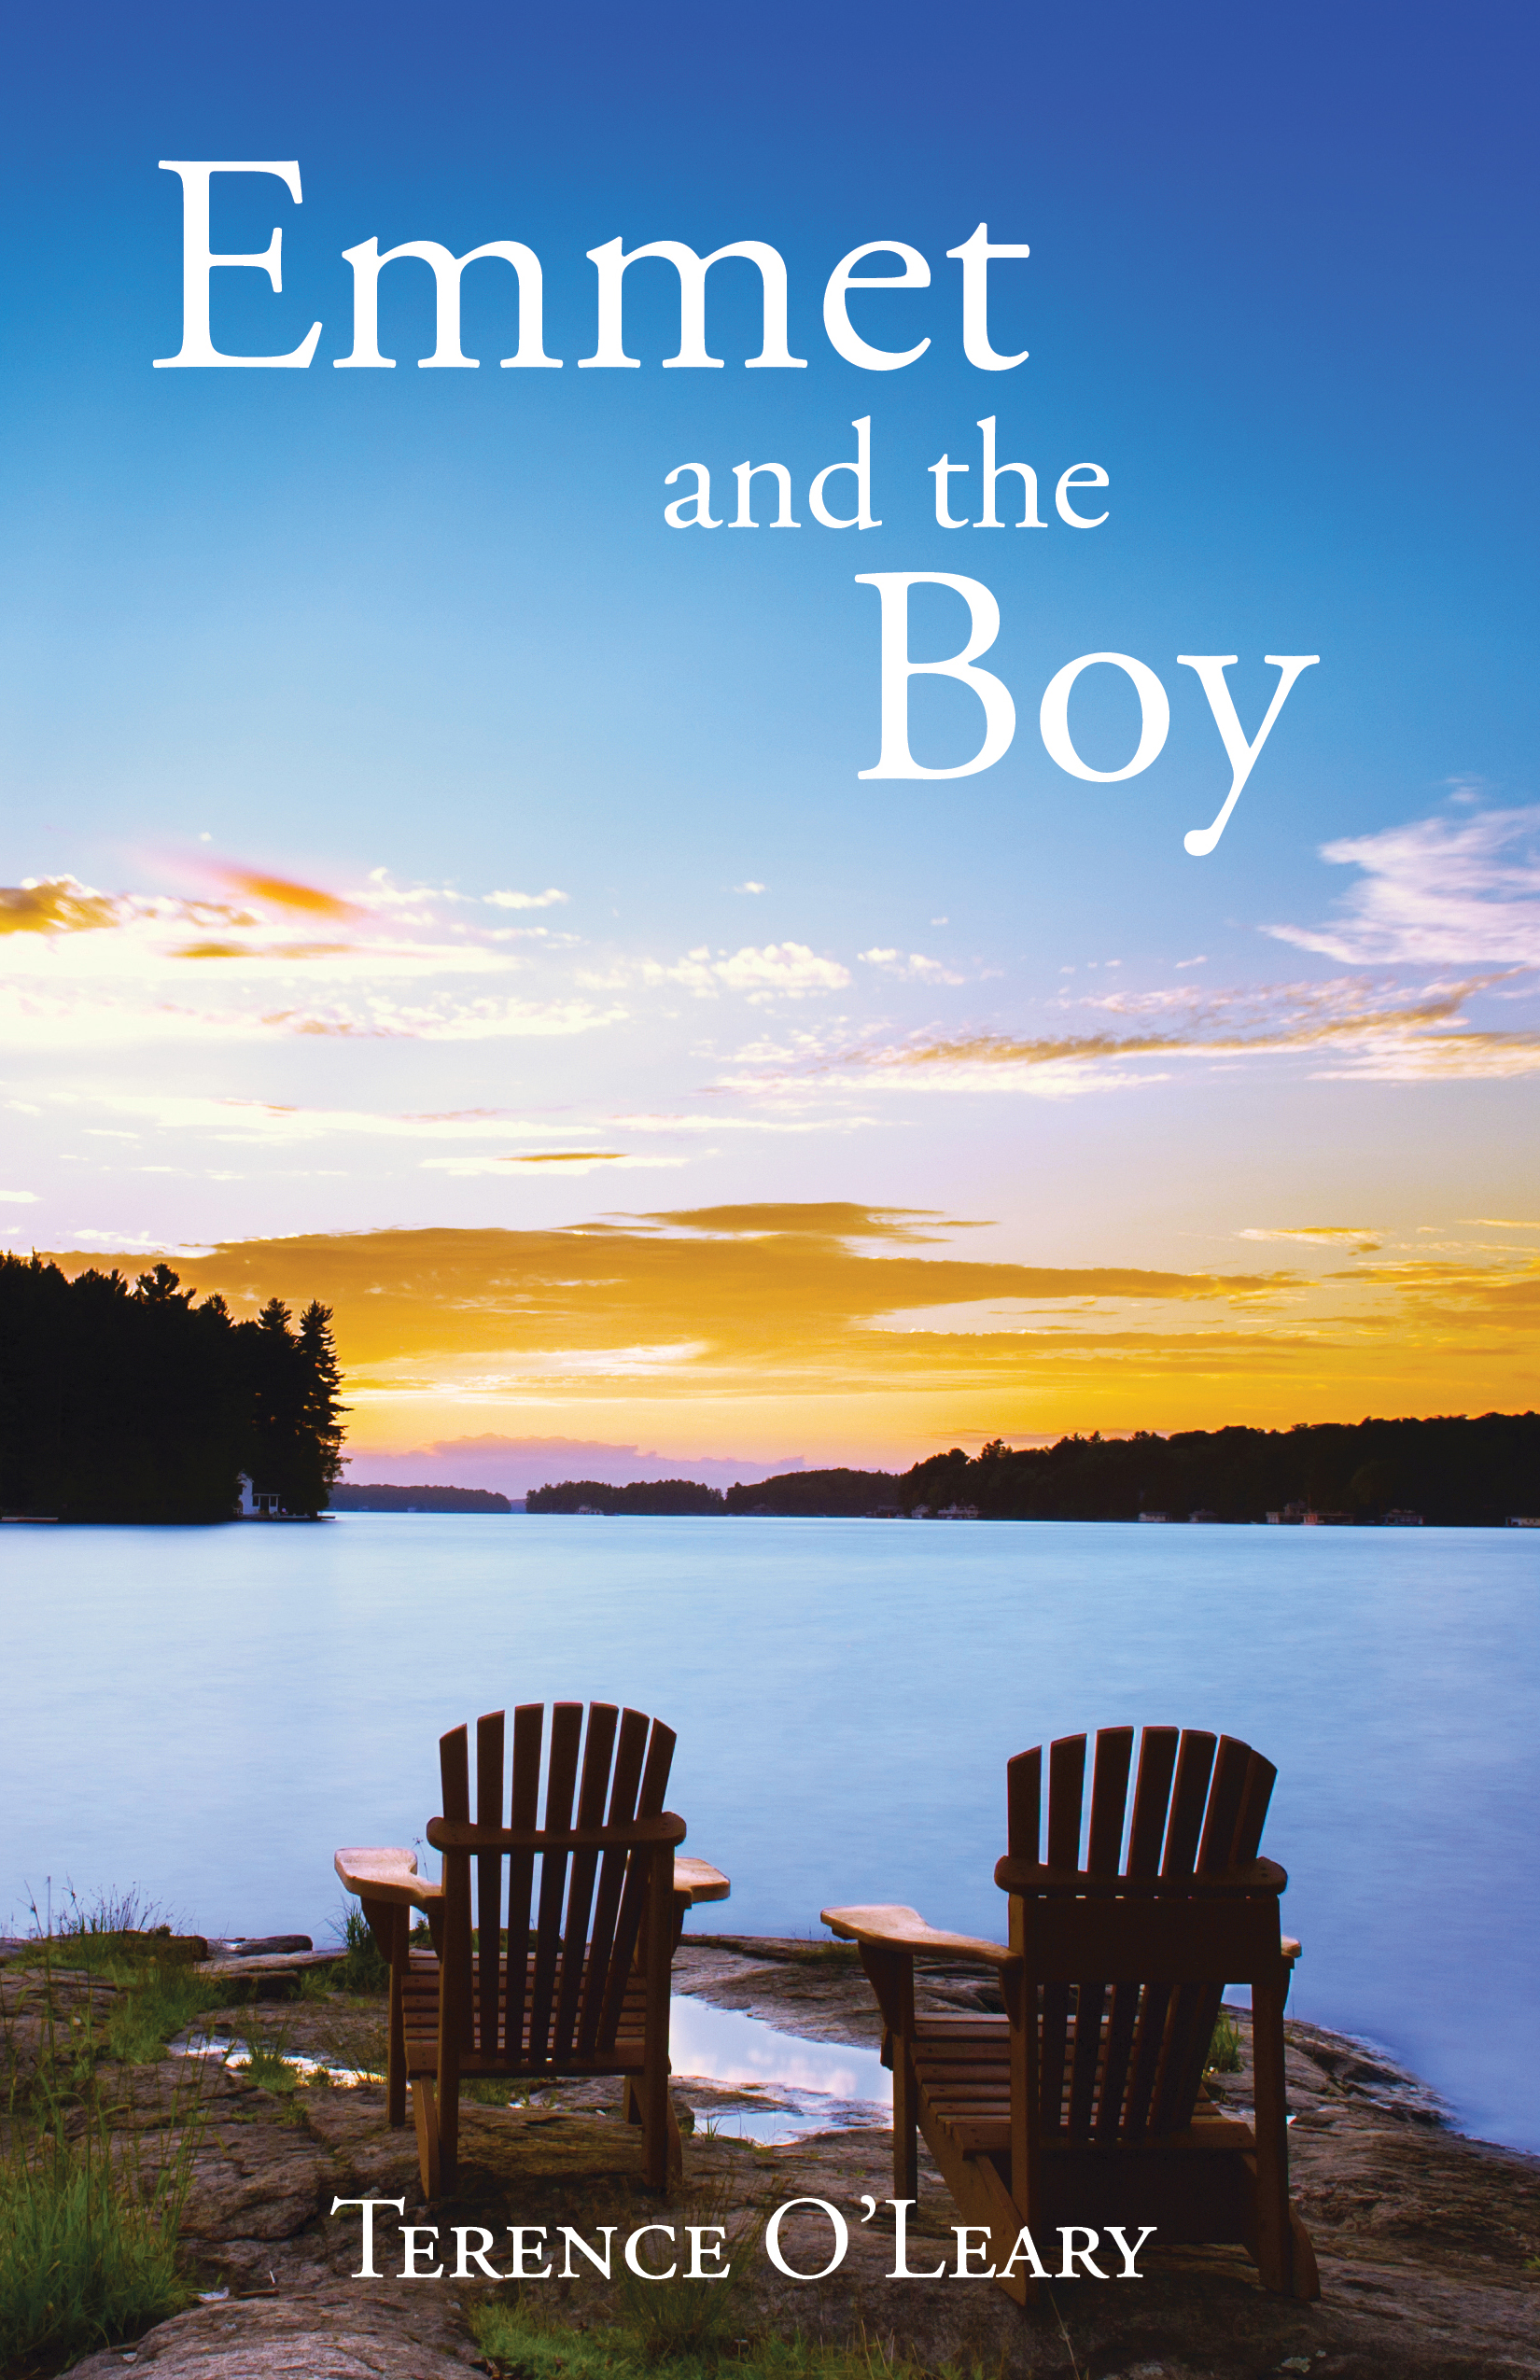 Emmet and the Boy by Terence O'Leary